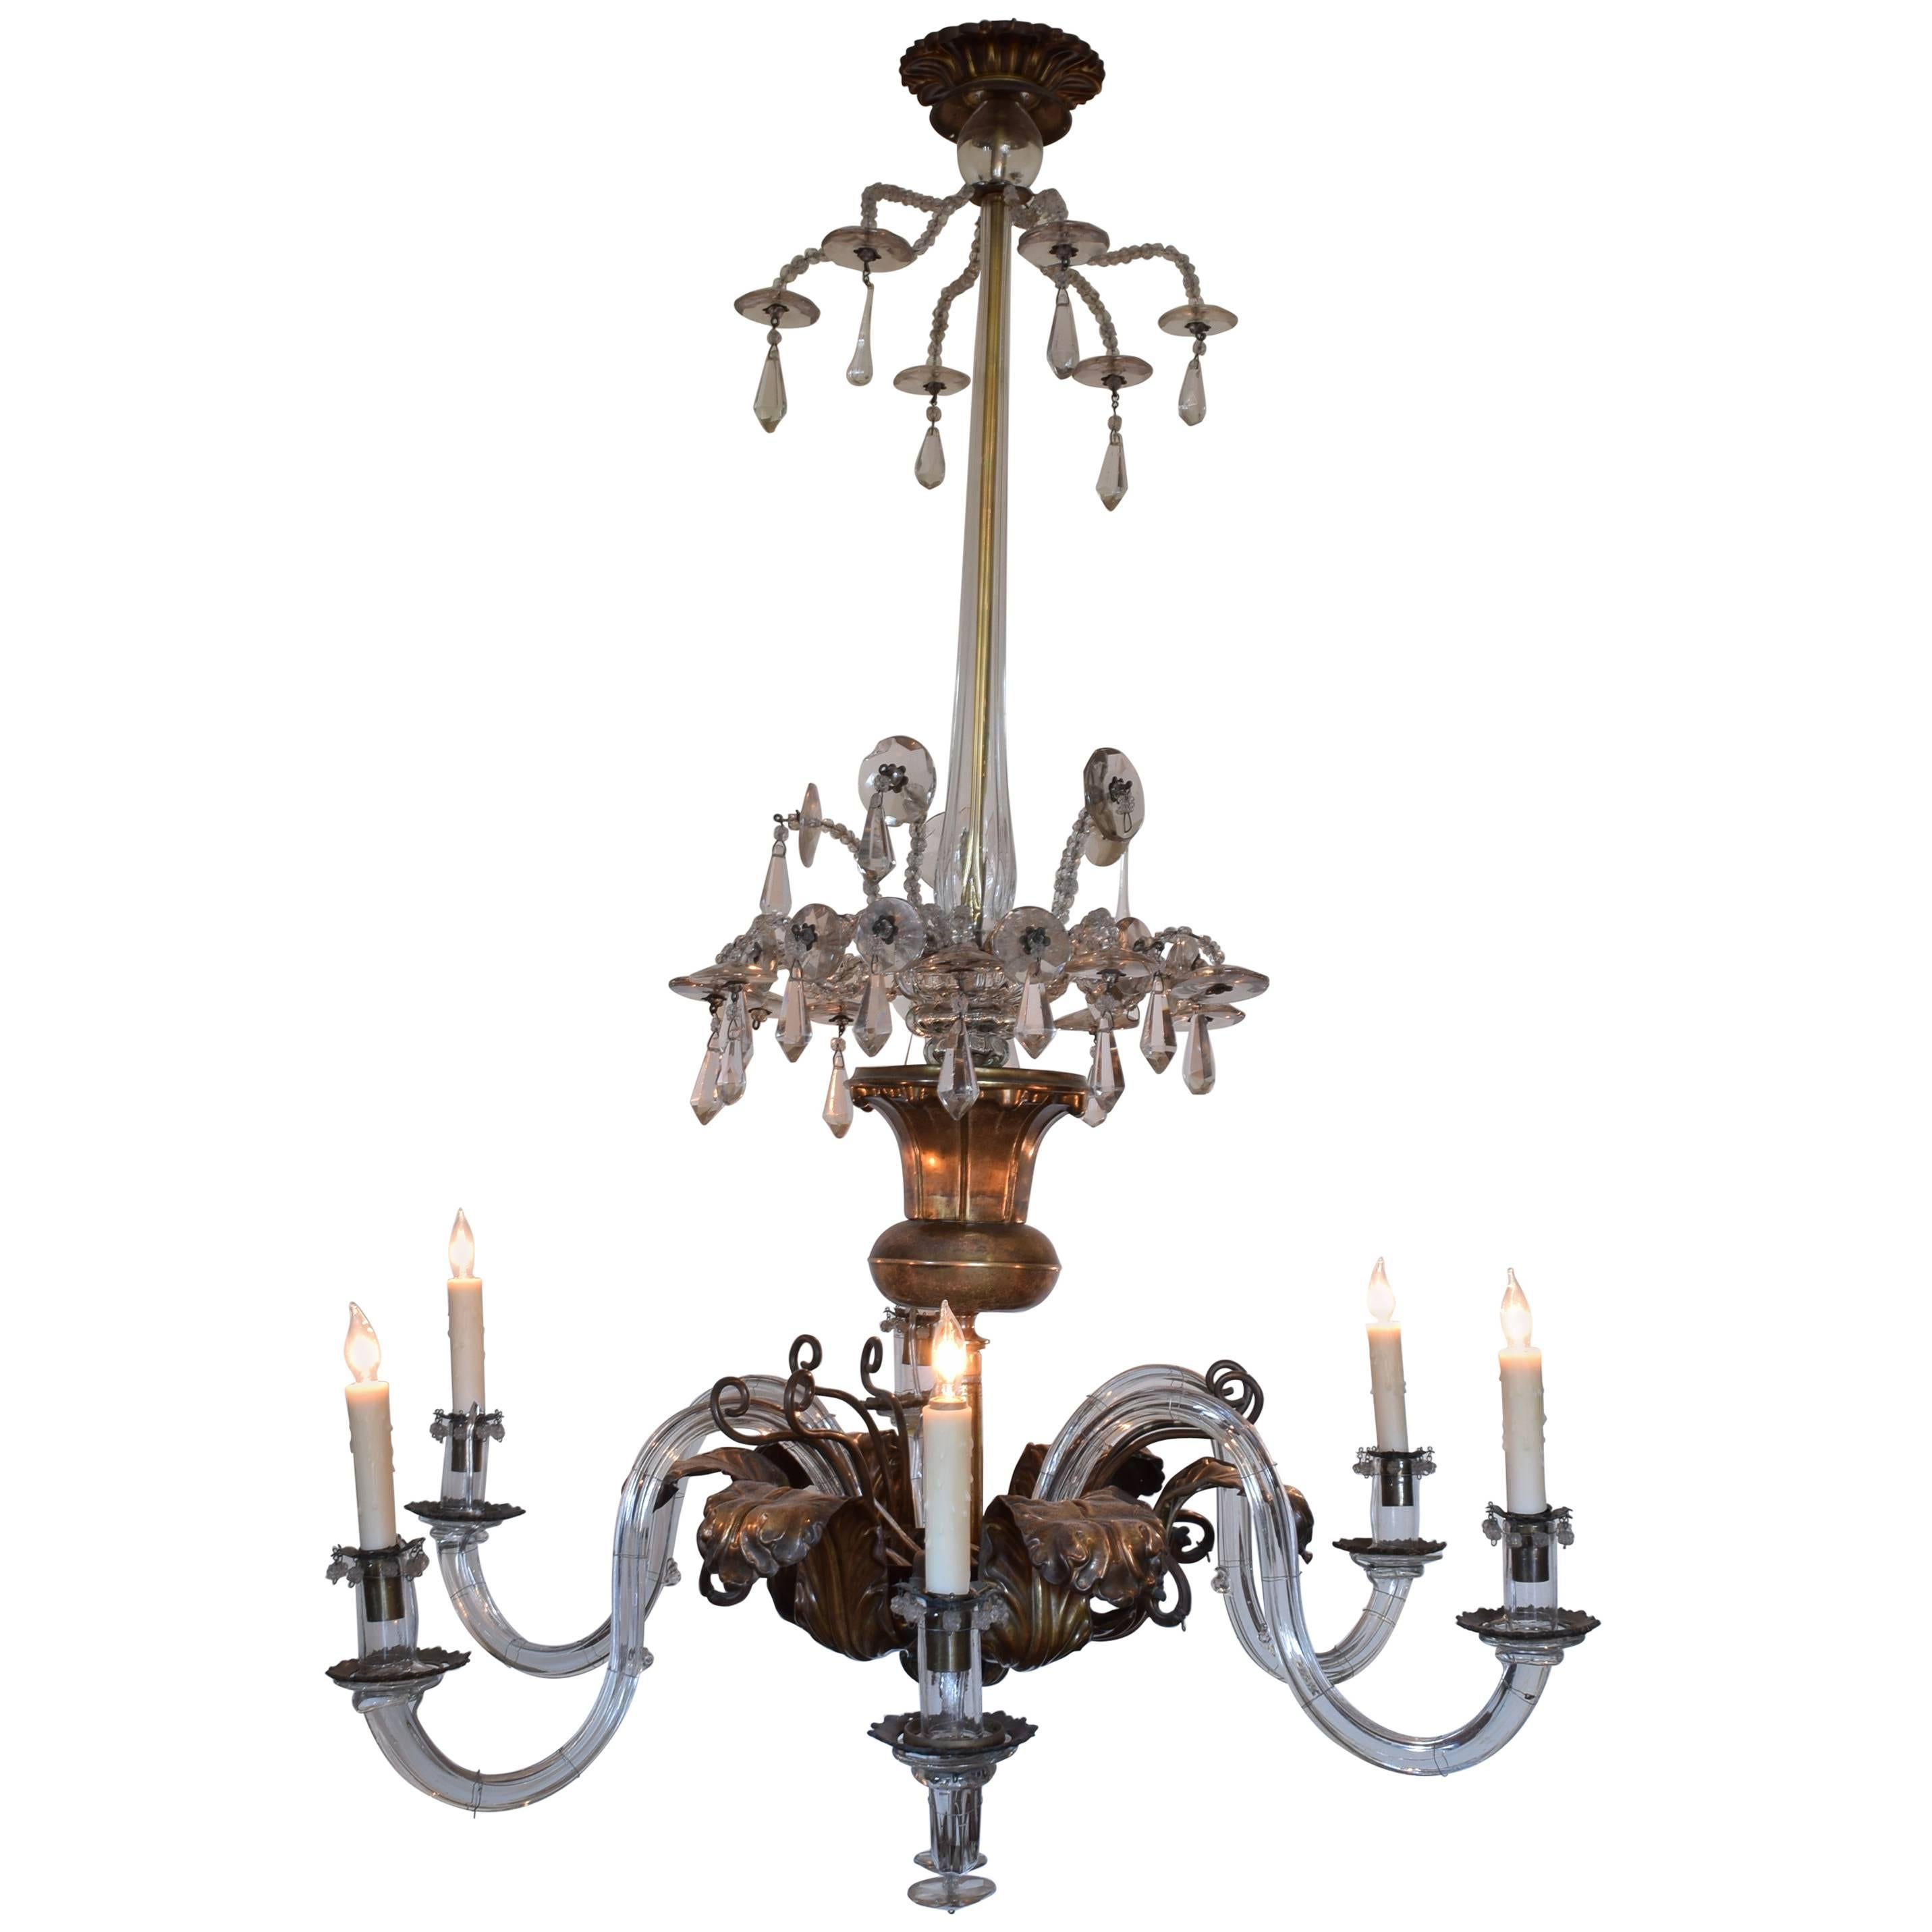 Italian Neoclassical Brass and Glass Six-Light Chandelier, 19th Century UL Wired